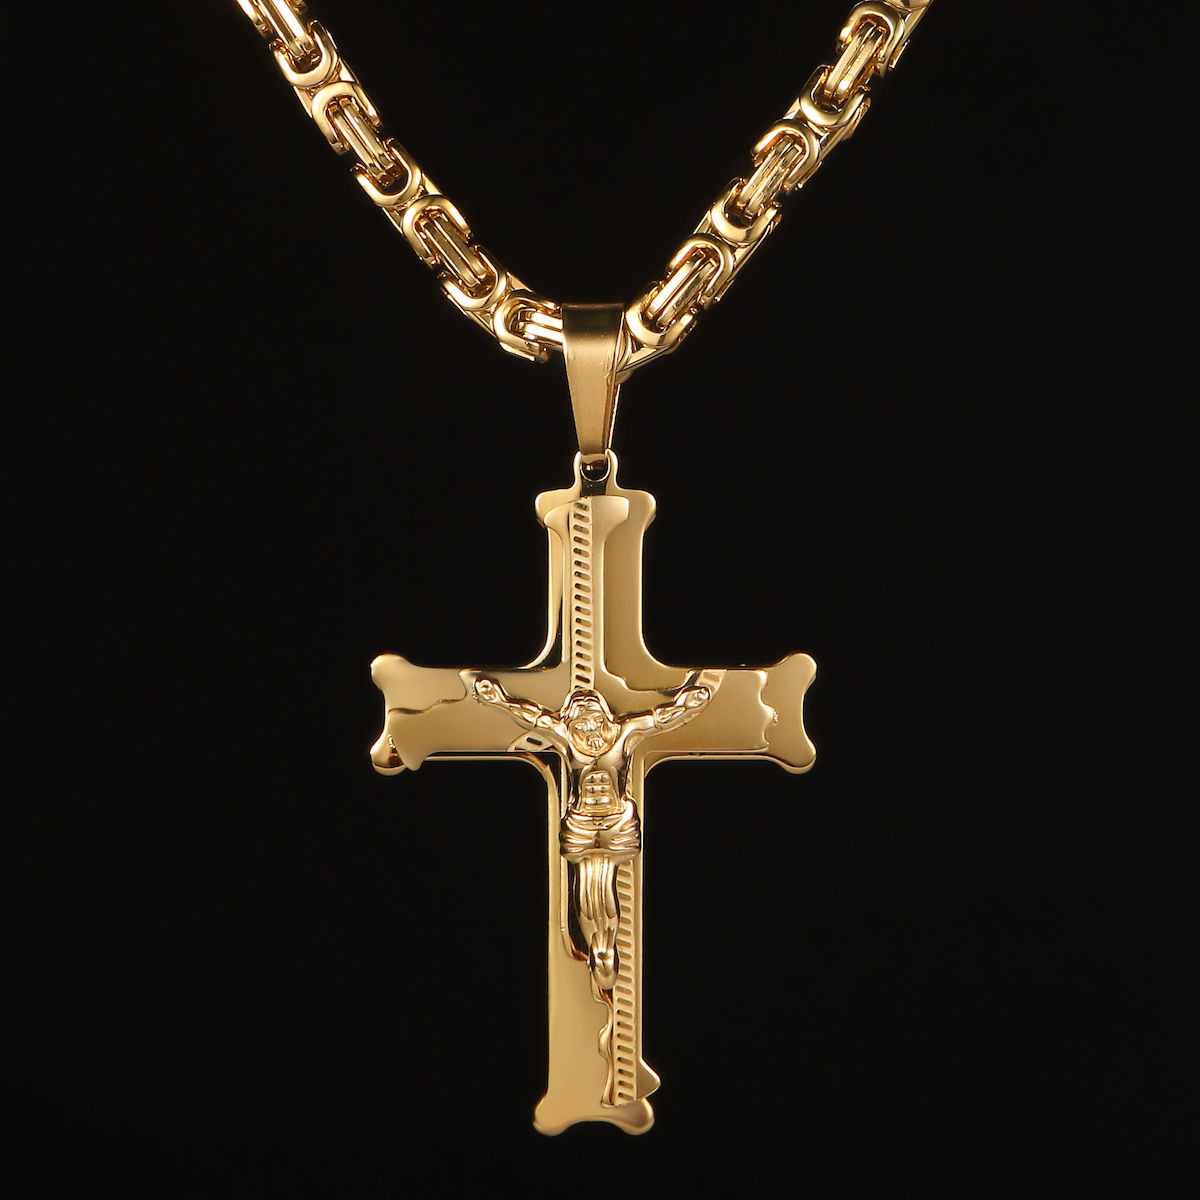 The 20 Best Ideas for Gold Cross Necklaces for Men - Home, Family ...